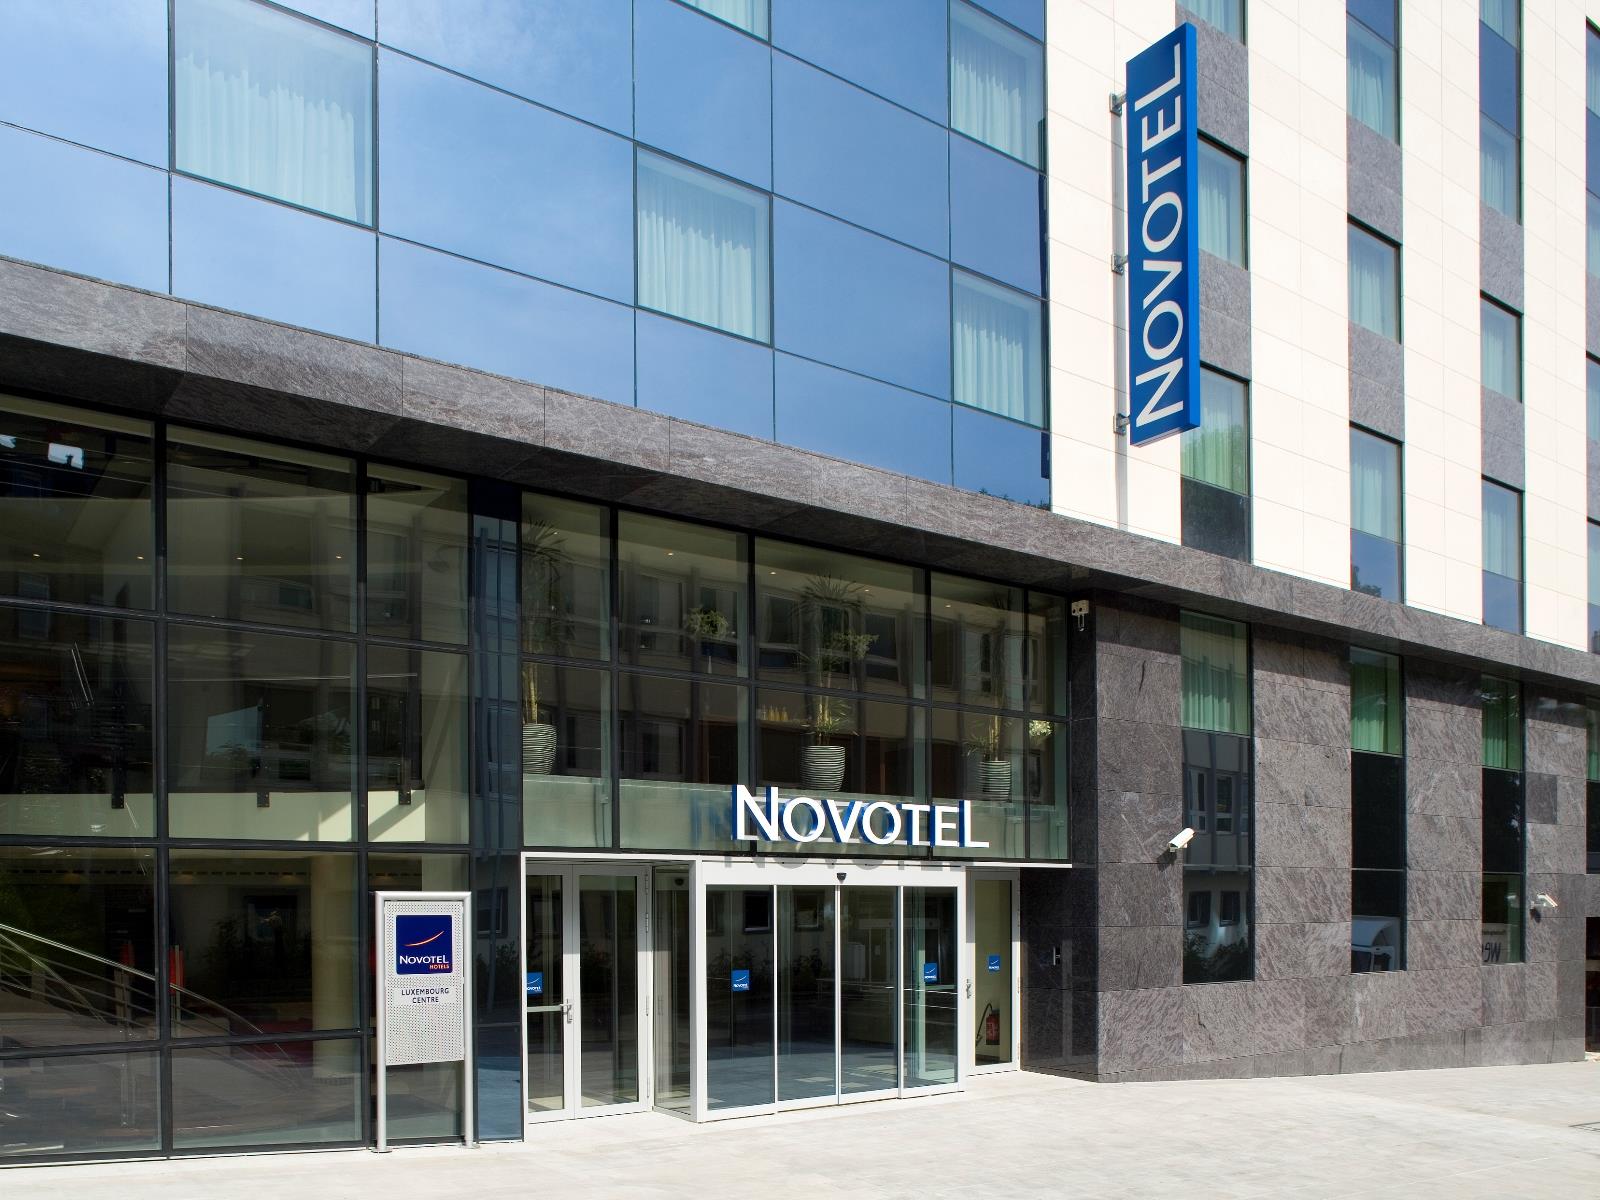 Novotel Luxembourg Centre Hotel Luxembourg FAQ 2017, What facilities are there in Novotel Luxembourg Centre Hotel Luxembourg 2017, What Languages Spoken are Supported in Novotel Luxembourg Centre Hotel Luxembourg 2017, Which payment cards are accepted in Novotel Luxembourg Centre Hotel Luxembourg , Luxembourg Novotel Luxembourg Centre Hotel room facilities and services Q&A 2017, Luxembourg Novotel Luxembourg Centre Hotel online booking services 2017, Luxembourg Novotel Luxembourg Centre Hotel address 2017, Luxembourg Novotel Luxembourg Centre Hotel telephone number 2017,Luxembourg Novotel Luxembourg Centre Hotel map 2017, Luxembourg Novotel Luxembourg Centre Hotel traffic guide 2017, how to go Luxembourg Novotel Luxembourg Centre Hotel, Luxembourg Novotel Luxembourg Centre Hotel booking online 2017, Luxembourg Novotel Luxembourg Centre Hotel room types 2017.